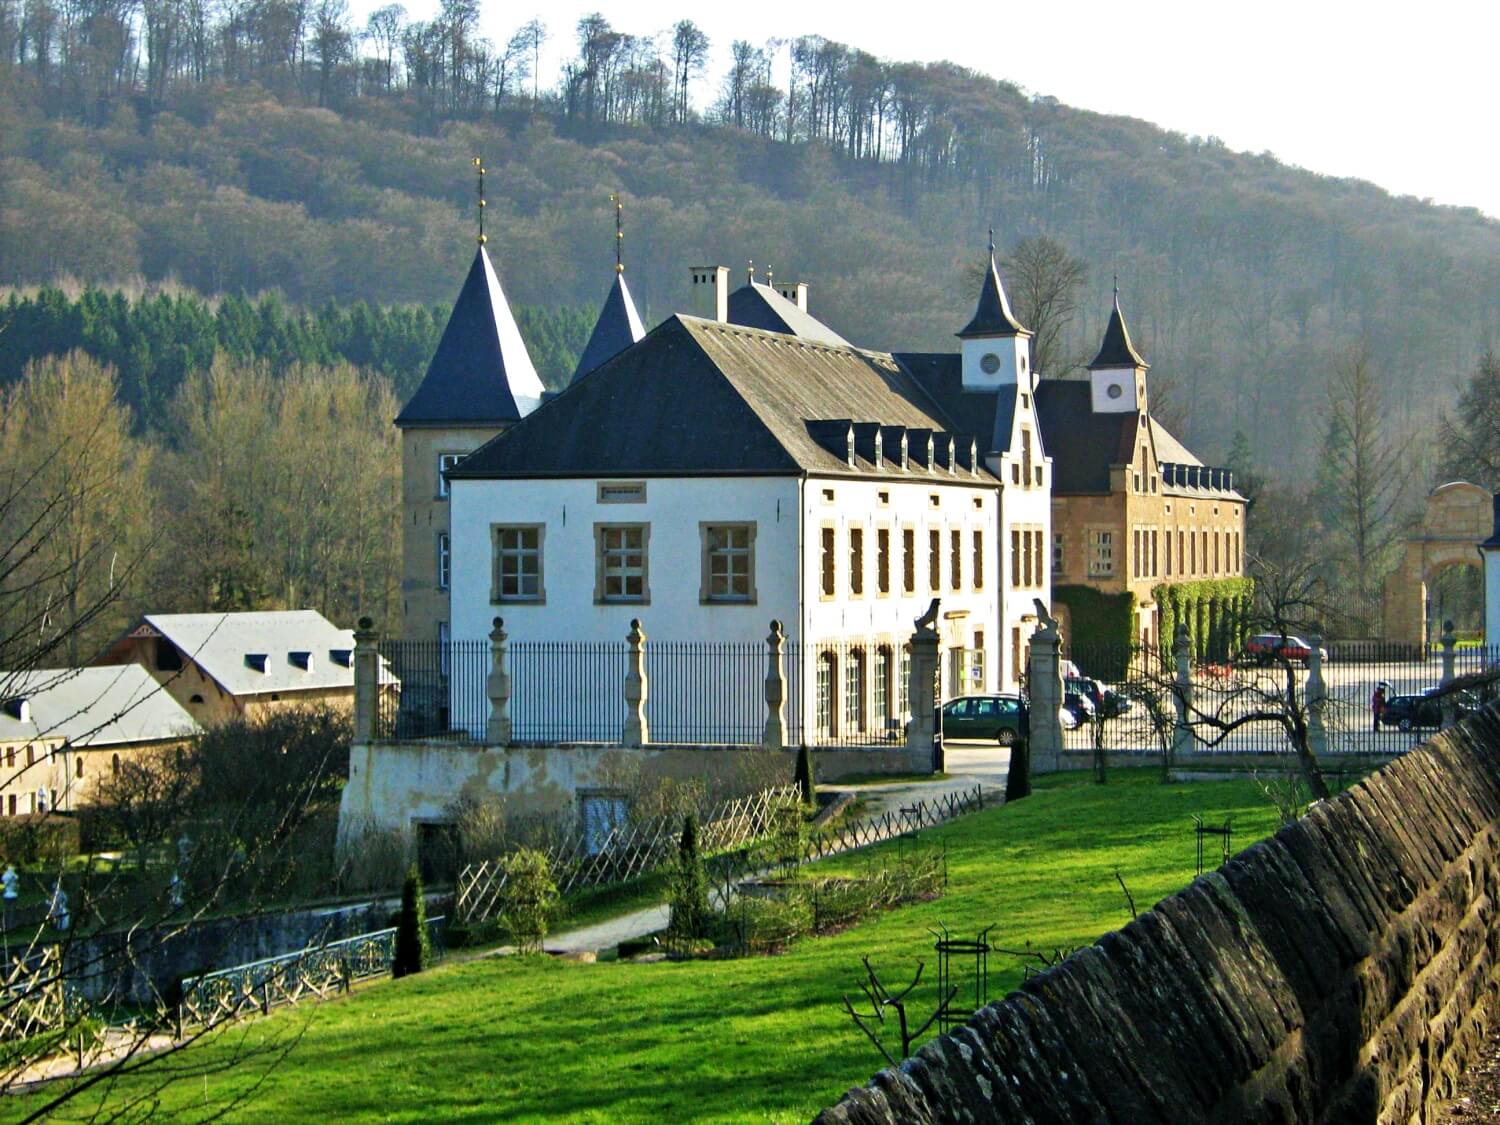 New Castle of Ansembourg